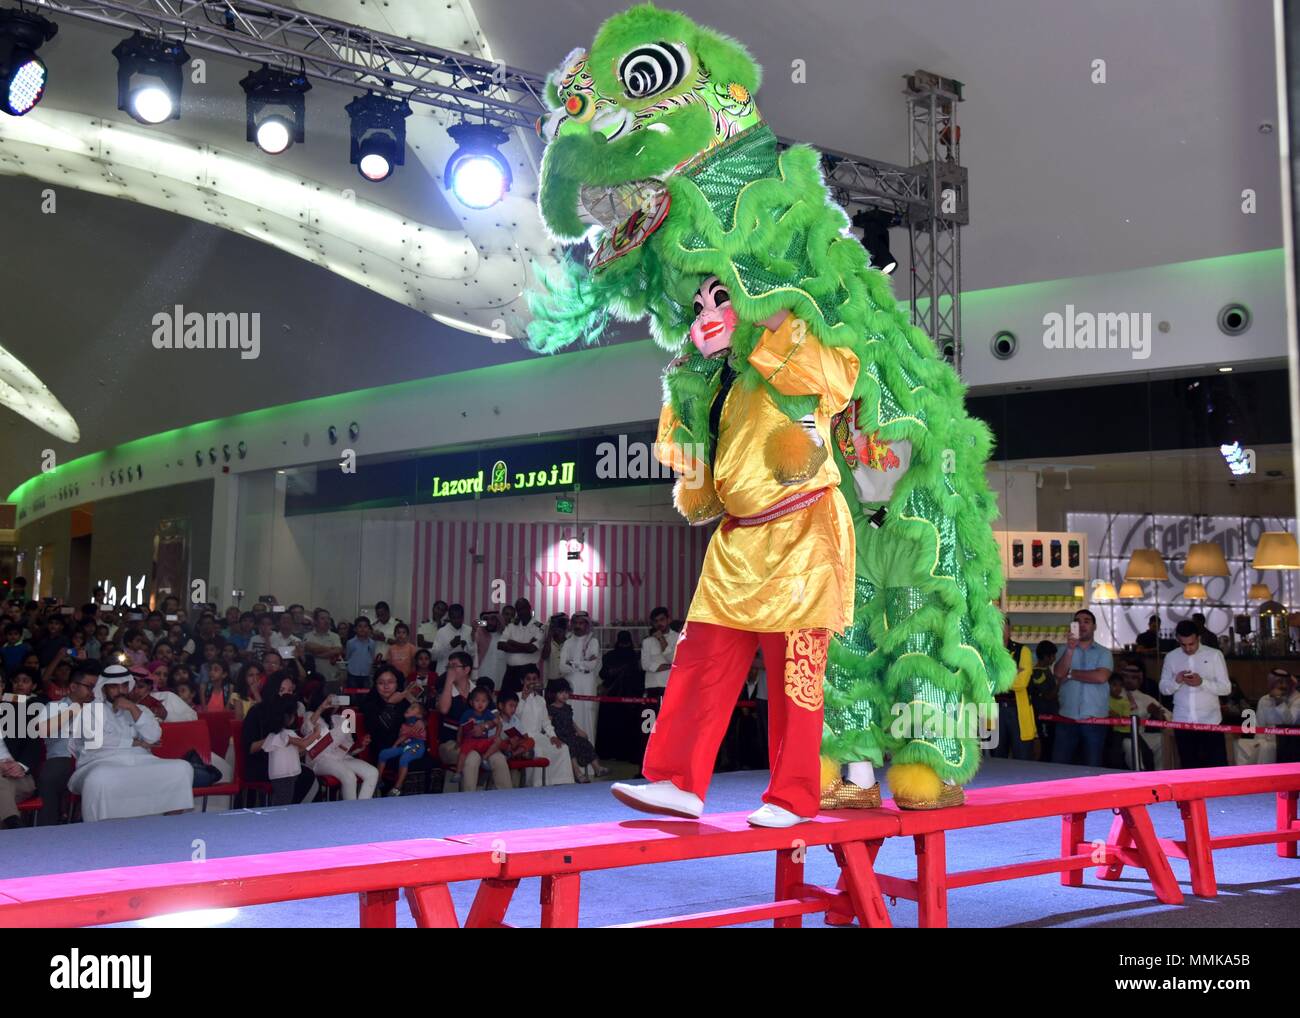 Dammam. 11th May, 2018. A Chinese actor performs at a shopping mall in Dammam, Saudi Arabia on May 11, 2018. A Chinese arts delegation for dragon and lion dance and martial arts is giving performances in two big cities in Saudi Arabia. The performances which started on May 8 will last until May 12. Credit: Wang Bo/Xinhua/Alamy Live News Stock Photo